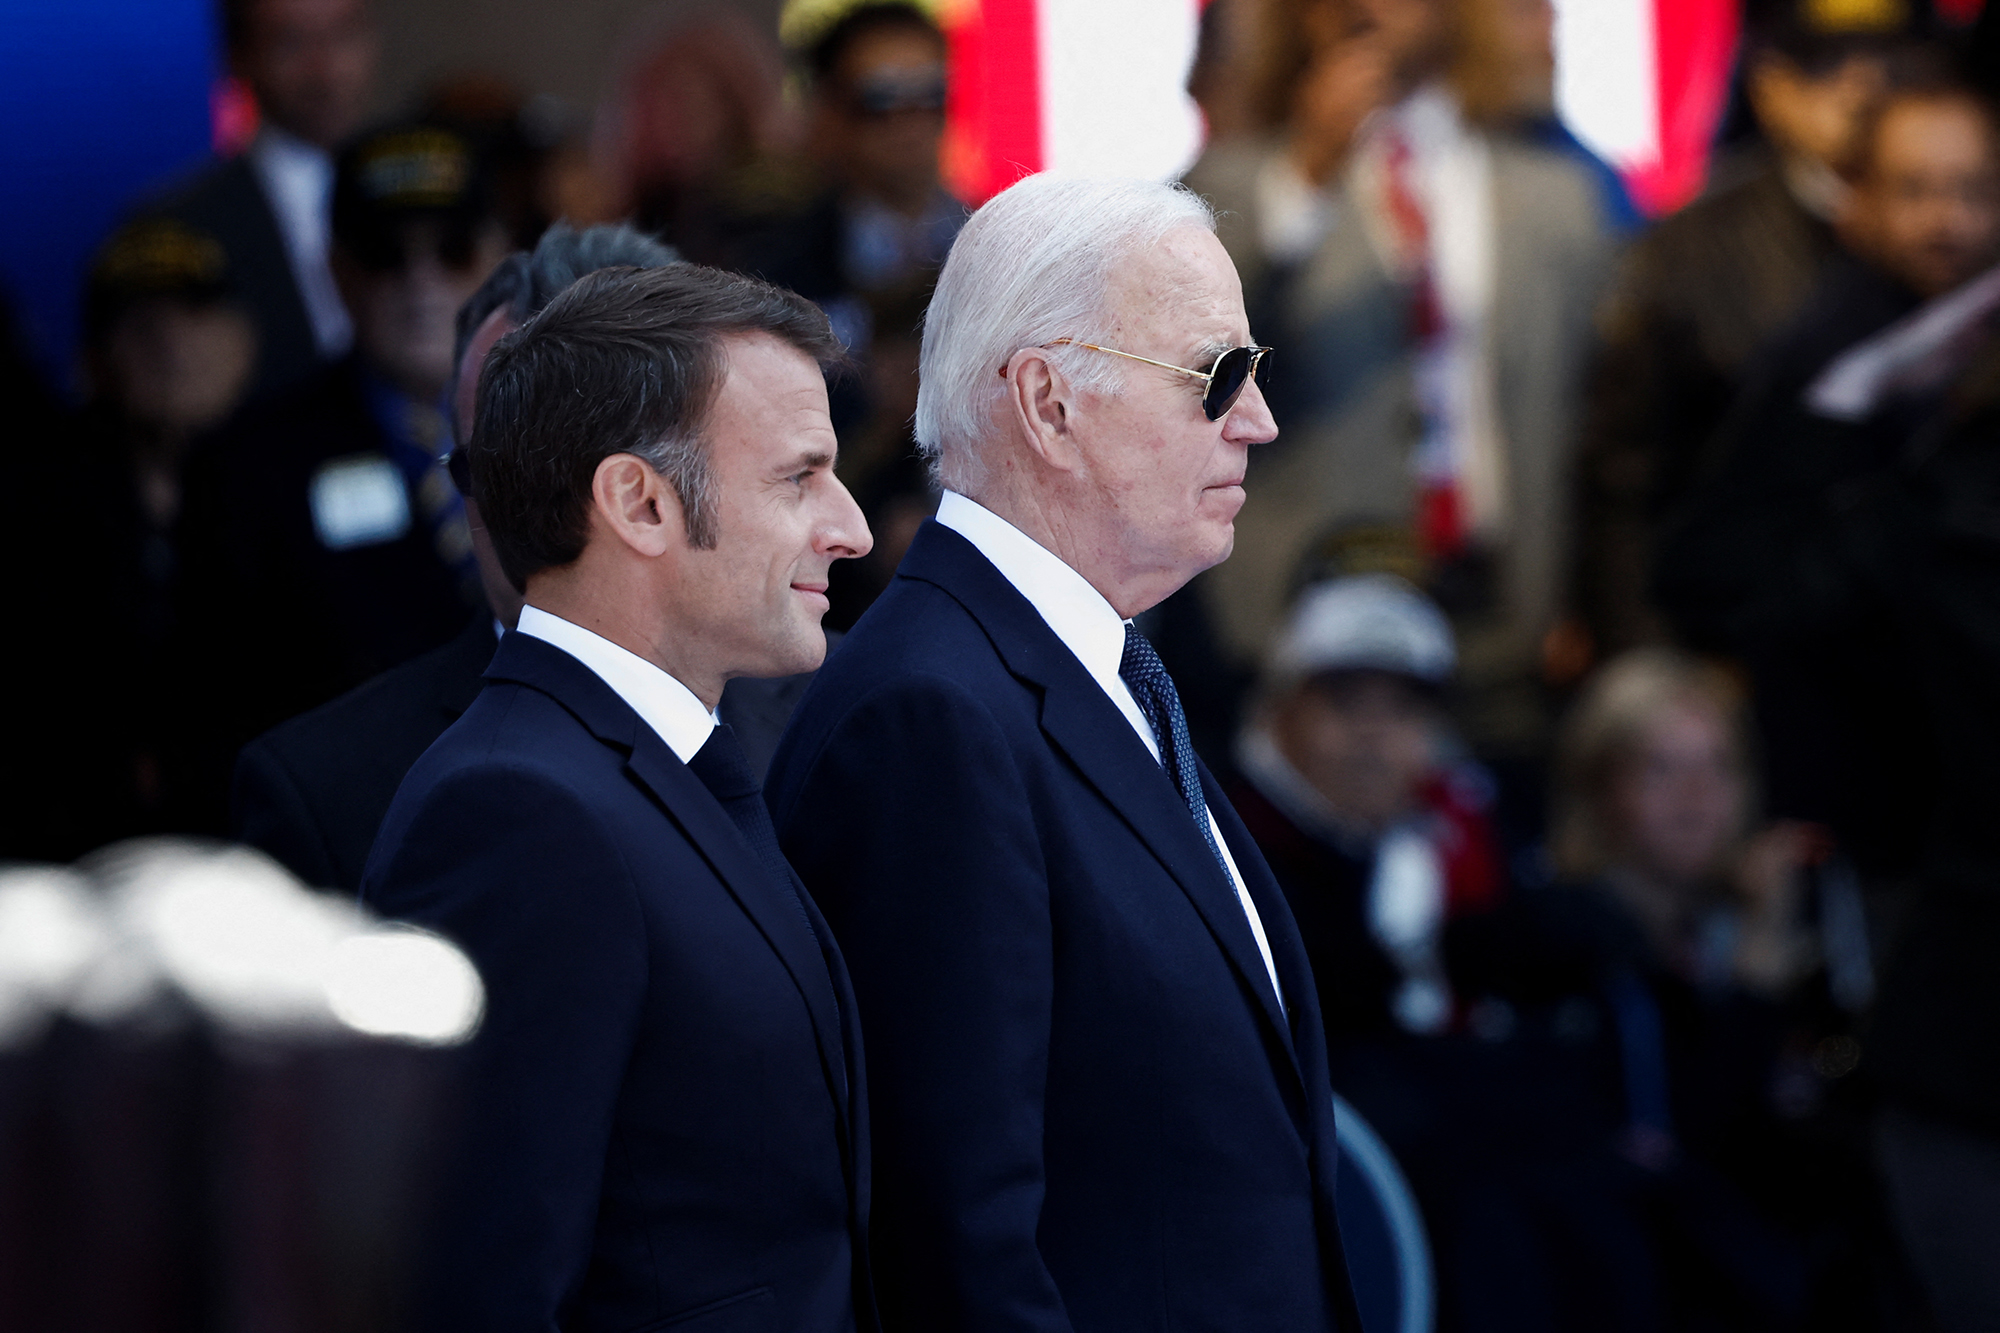 U.S. President Joe Biden and French President Emmanuel Macron attend a ceremony to mark the 80th anniversary of D-Day at the Normandy American Cemetery and Memorial in Colleville-sur-Mer, France, on June 6.